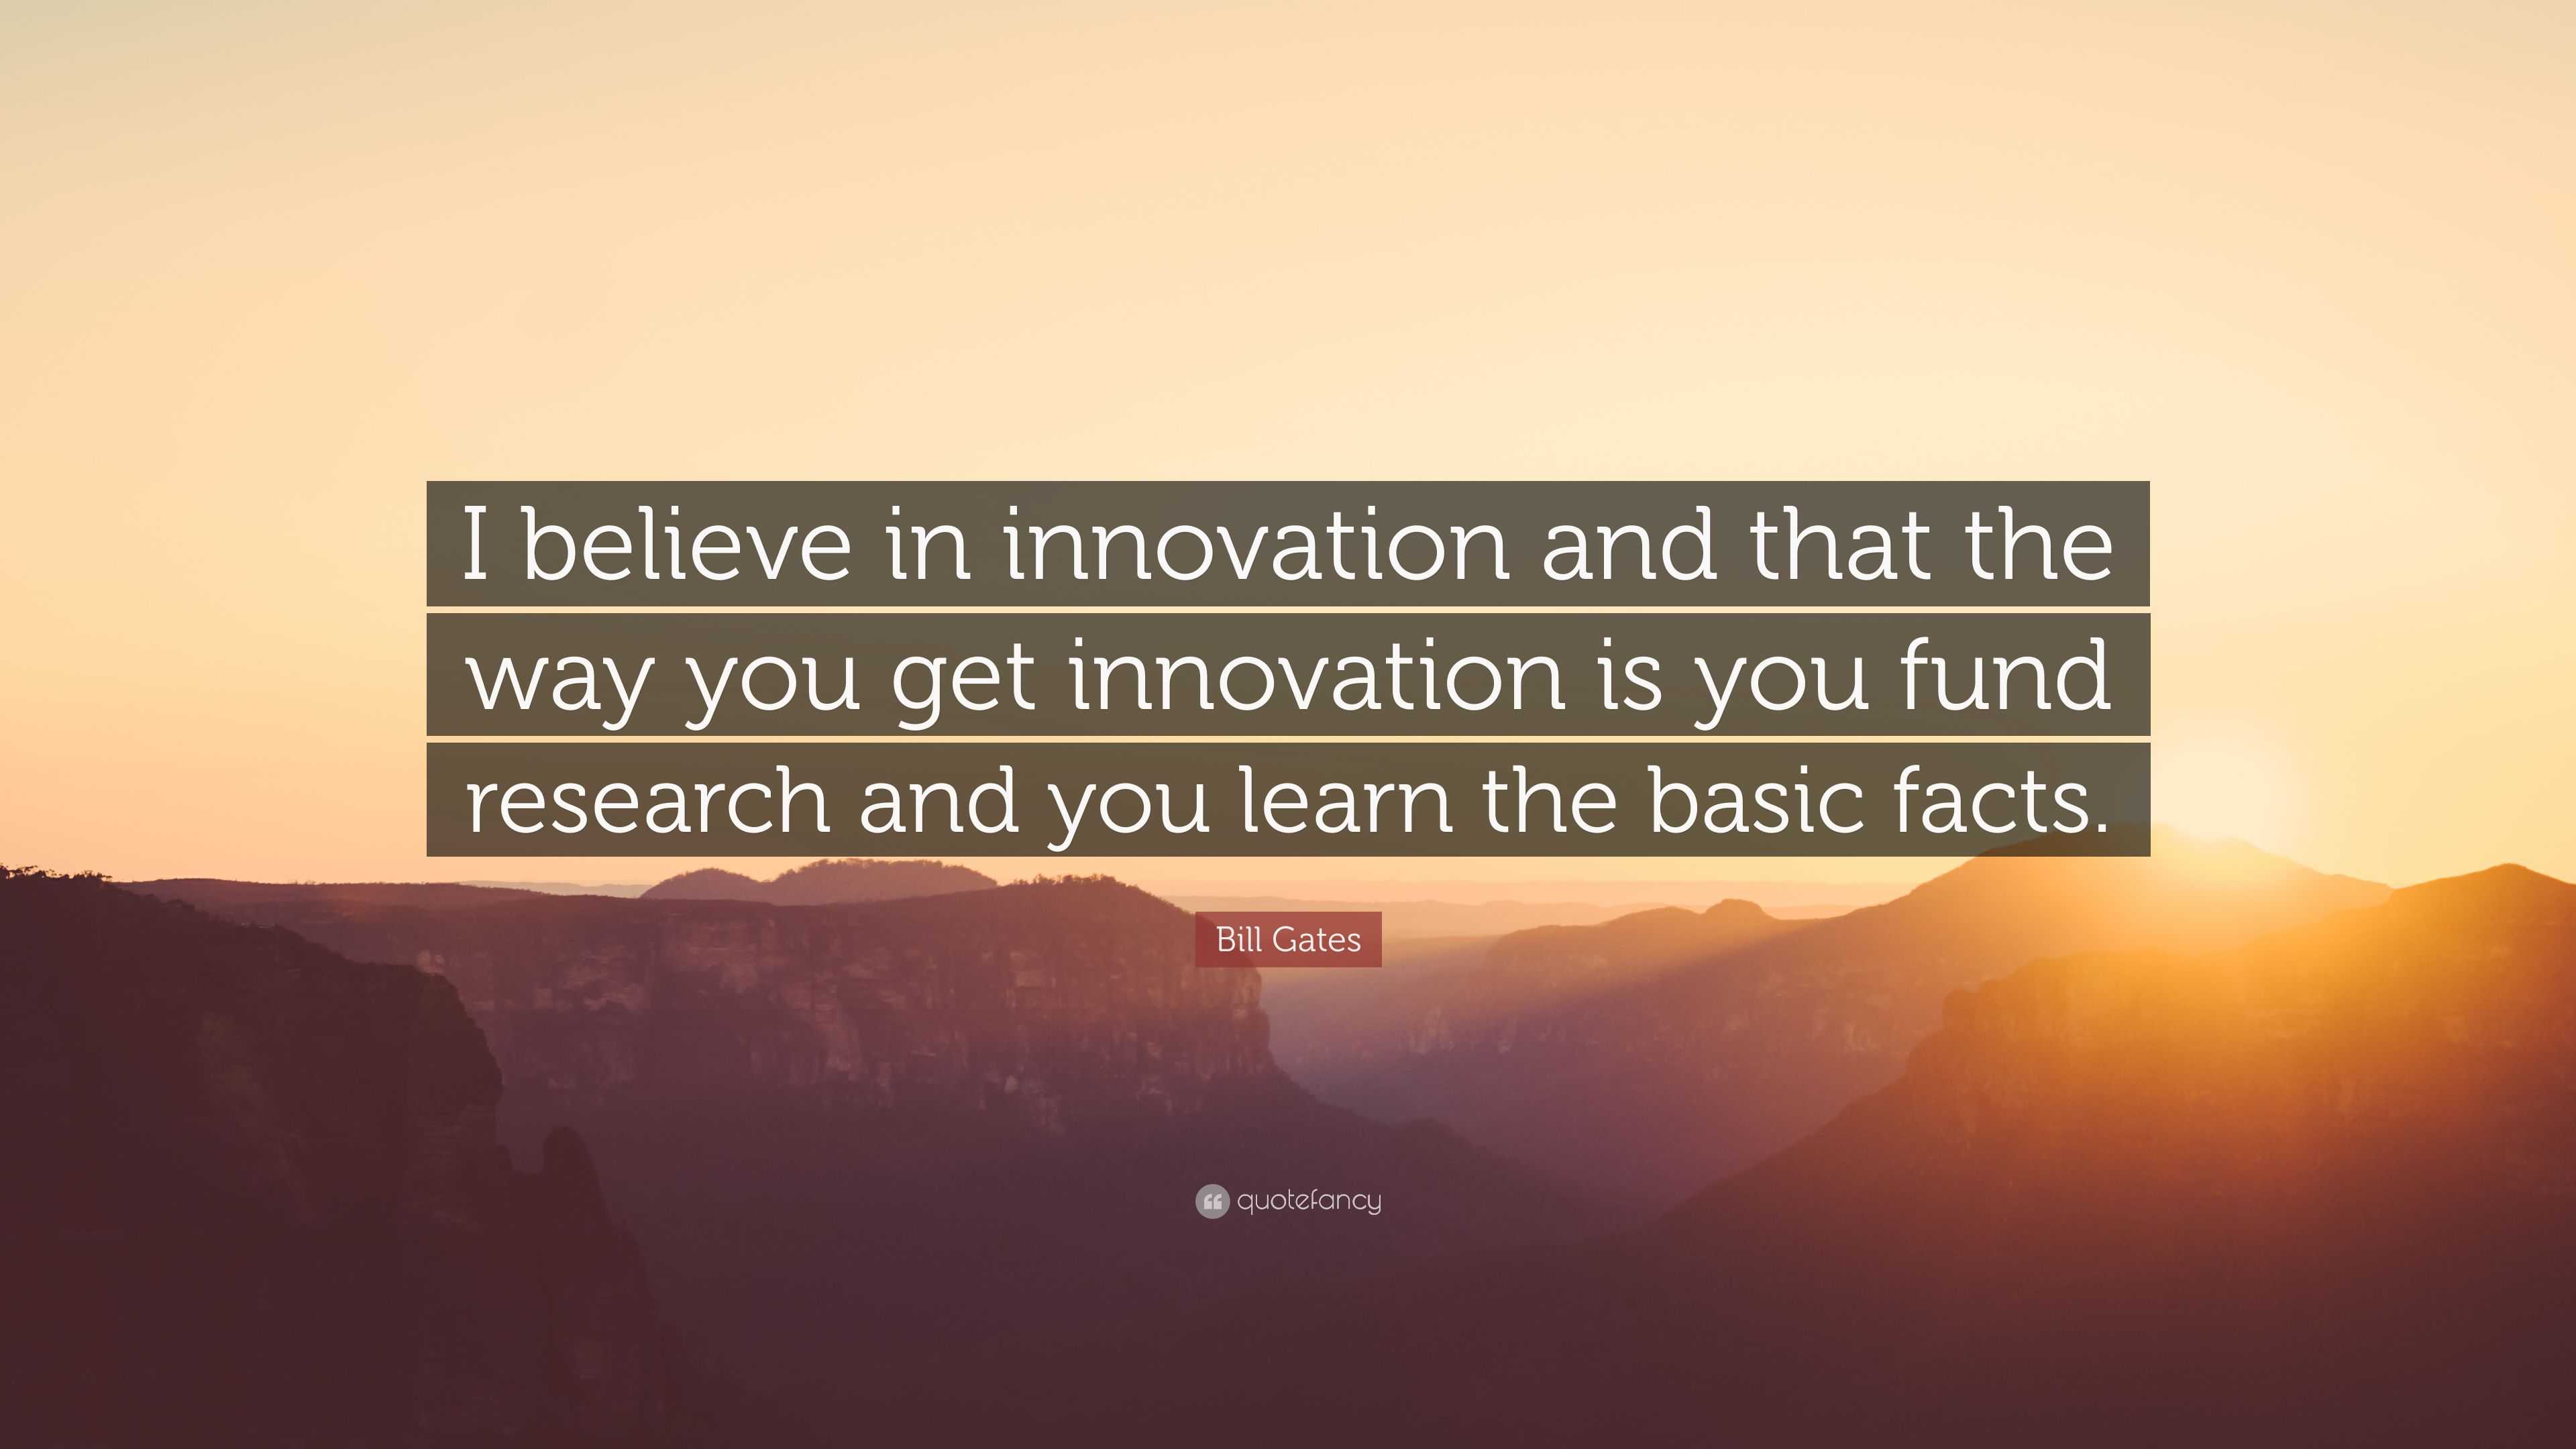 Bill Gates Quote: “I believe in innovation and that the way you get ...